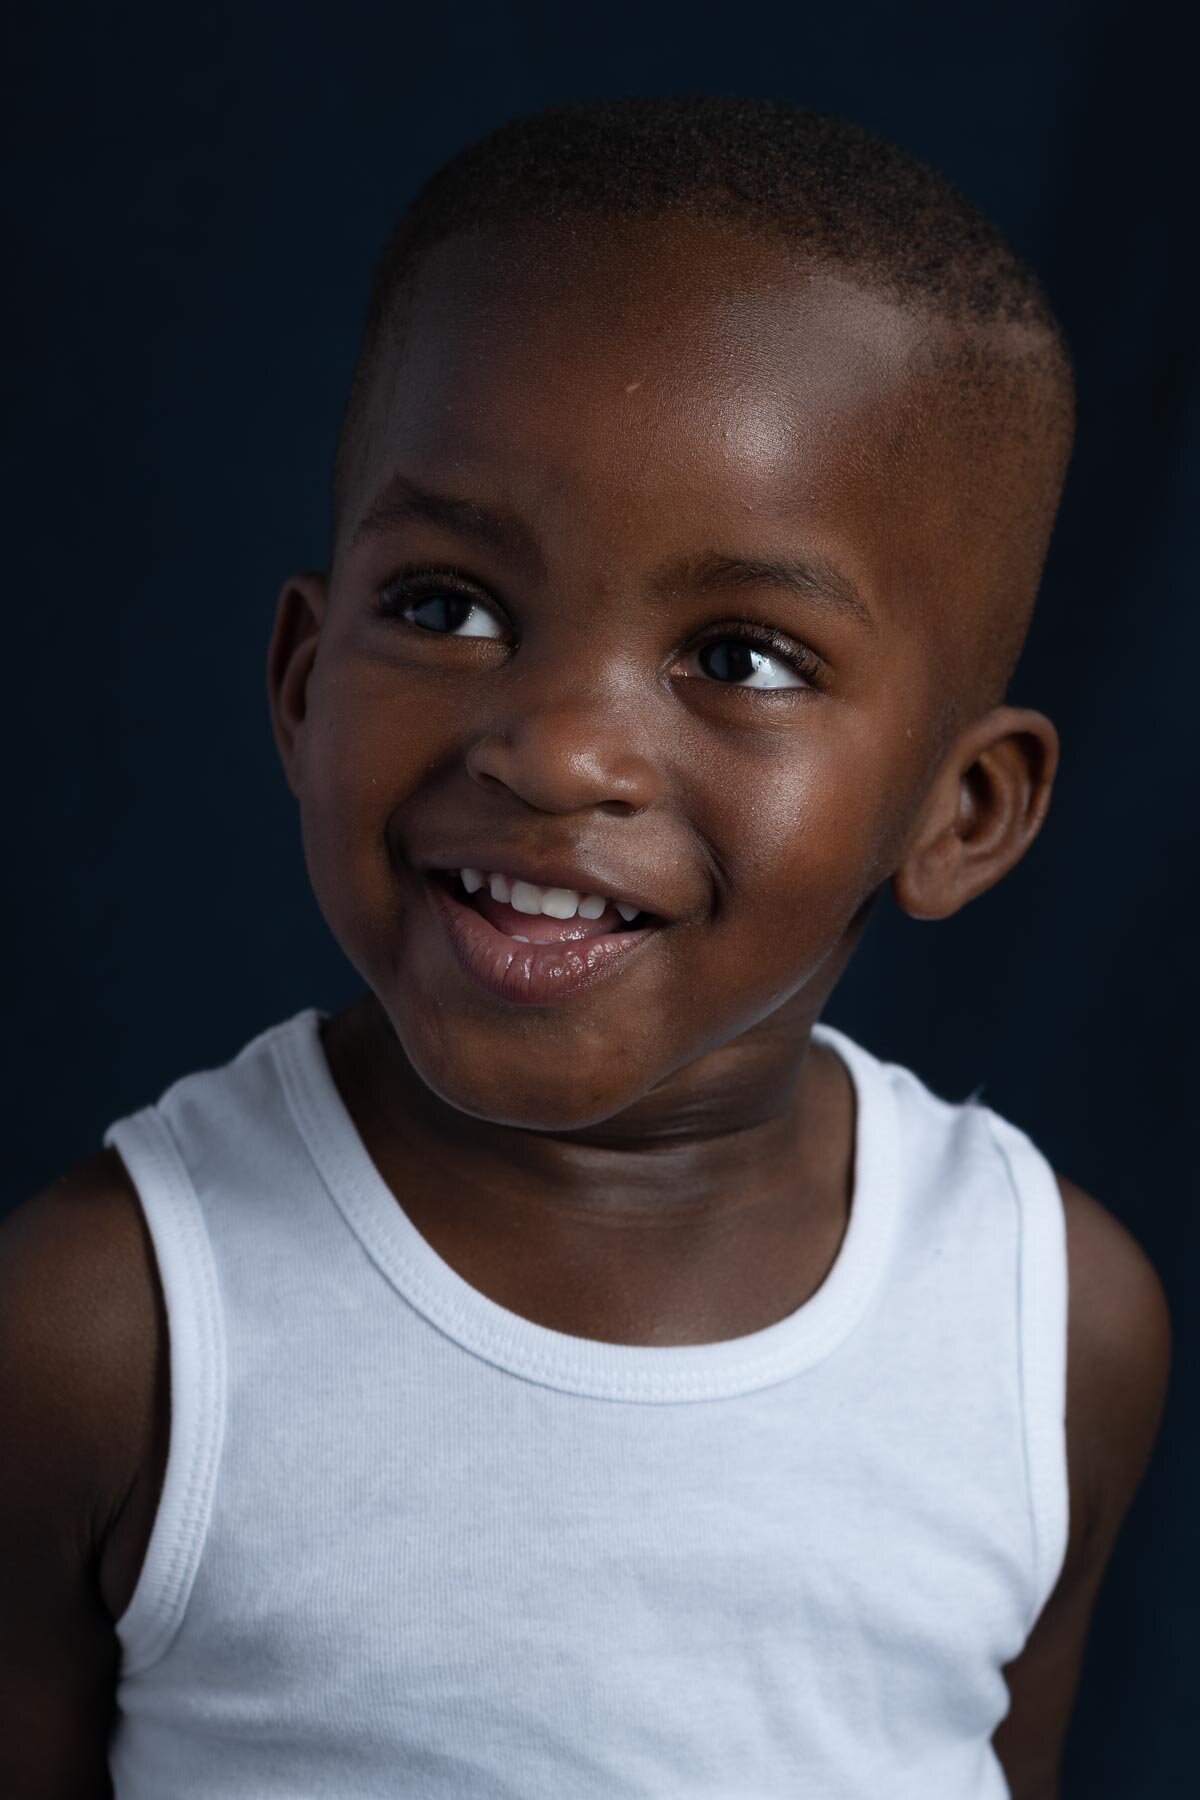  Studio shoot for this boy’s second birthday. He moved around a lot, so I was lucky to get this nice portrait shot. 